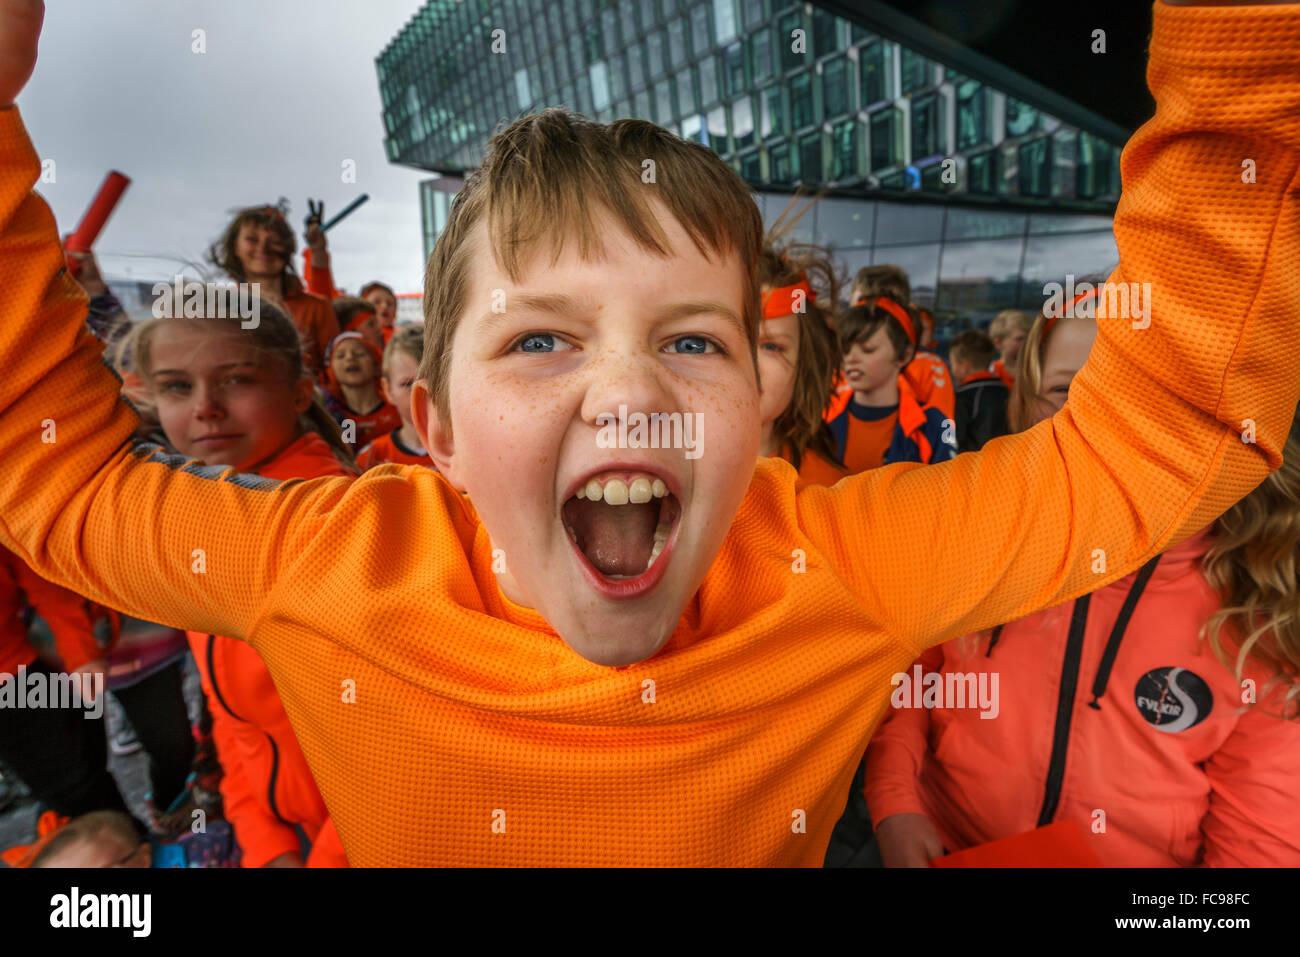 Happy young boy during the Children's Festival, Reykjavik, Iceland Stock Photo